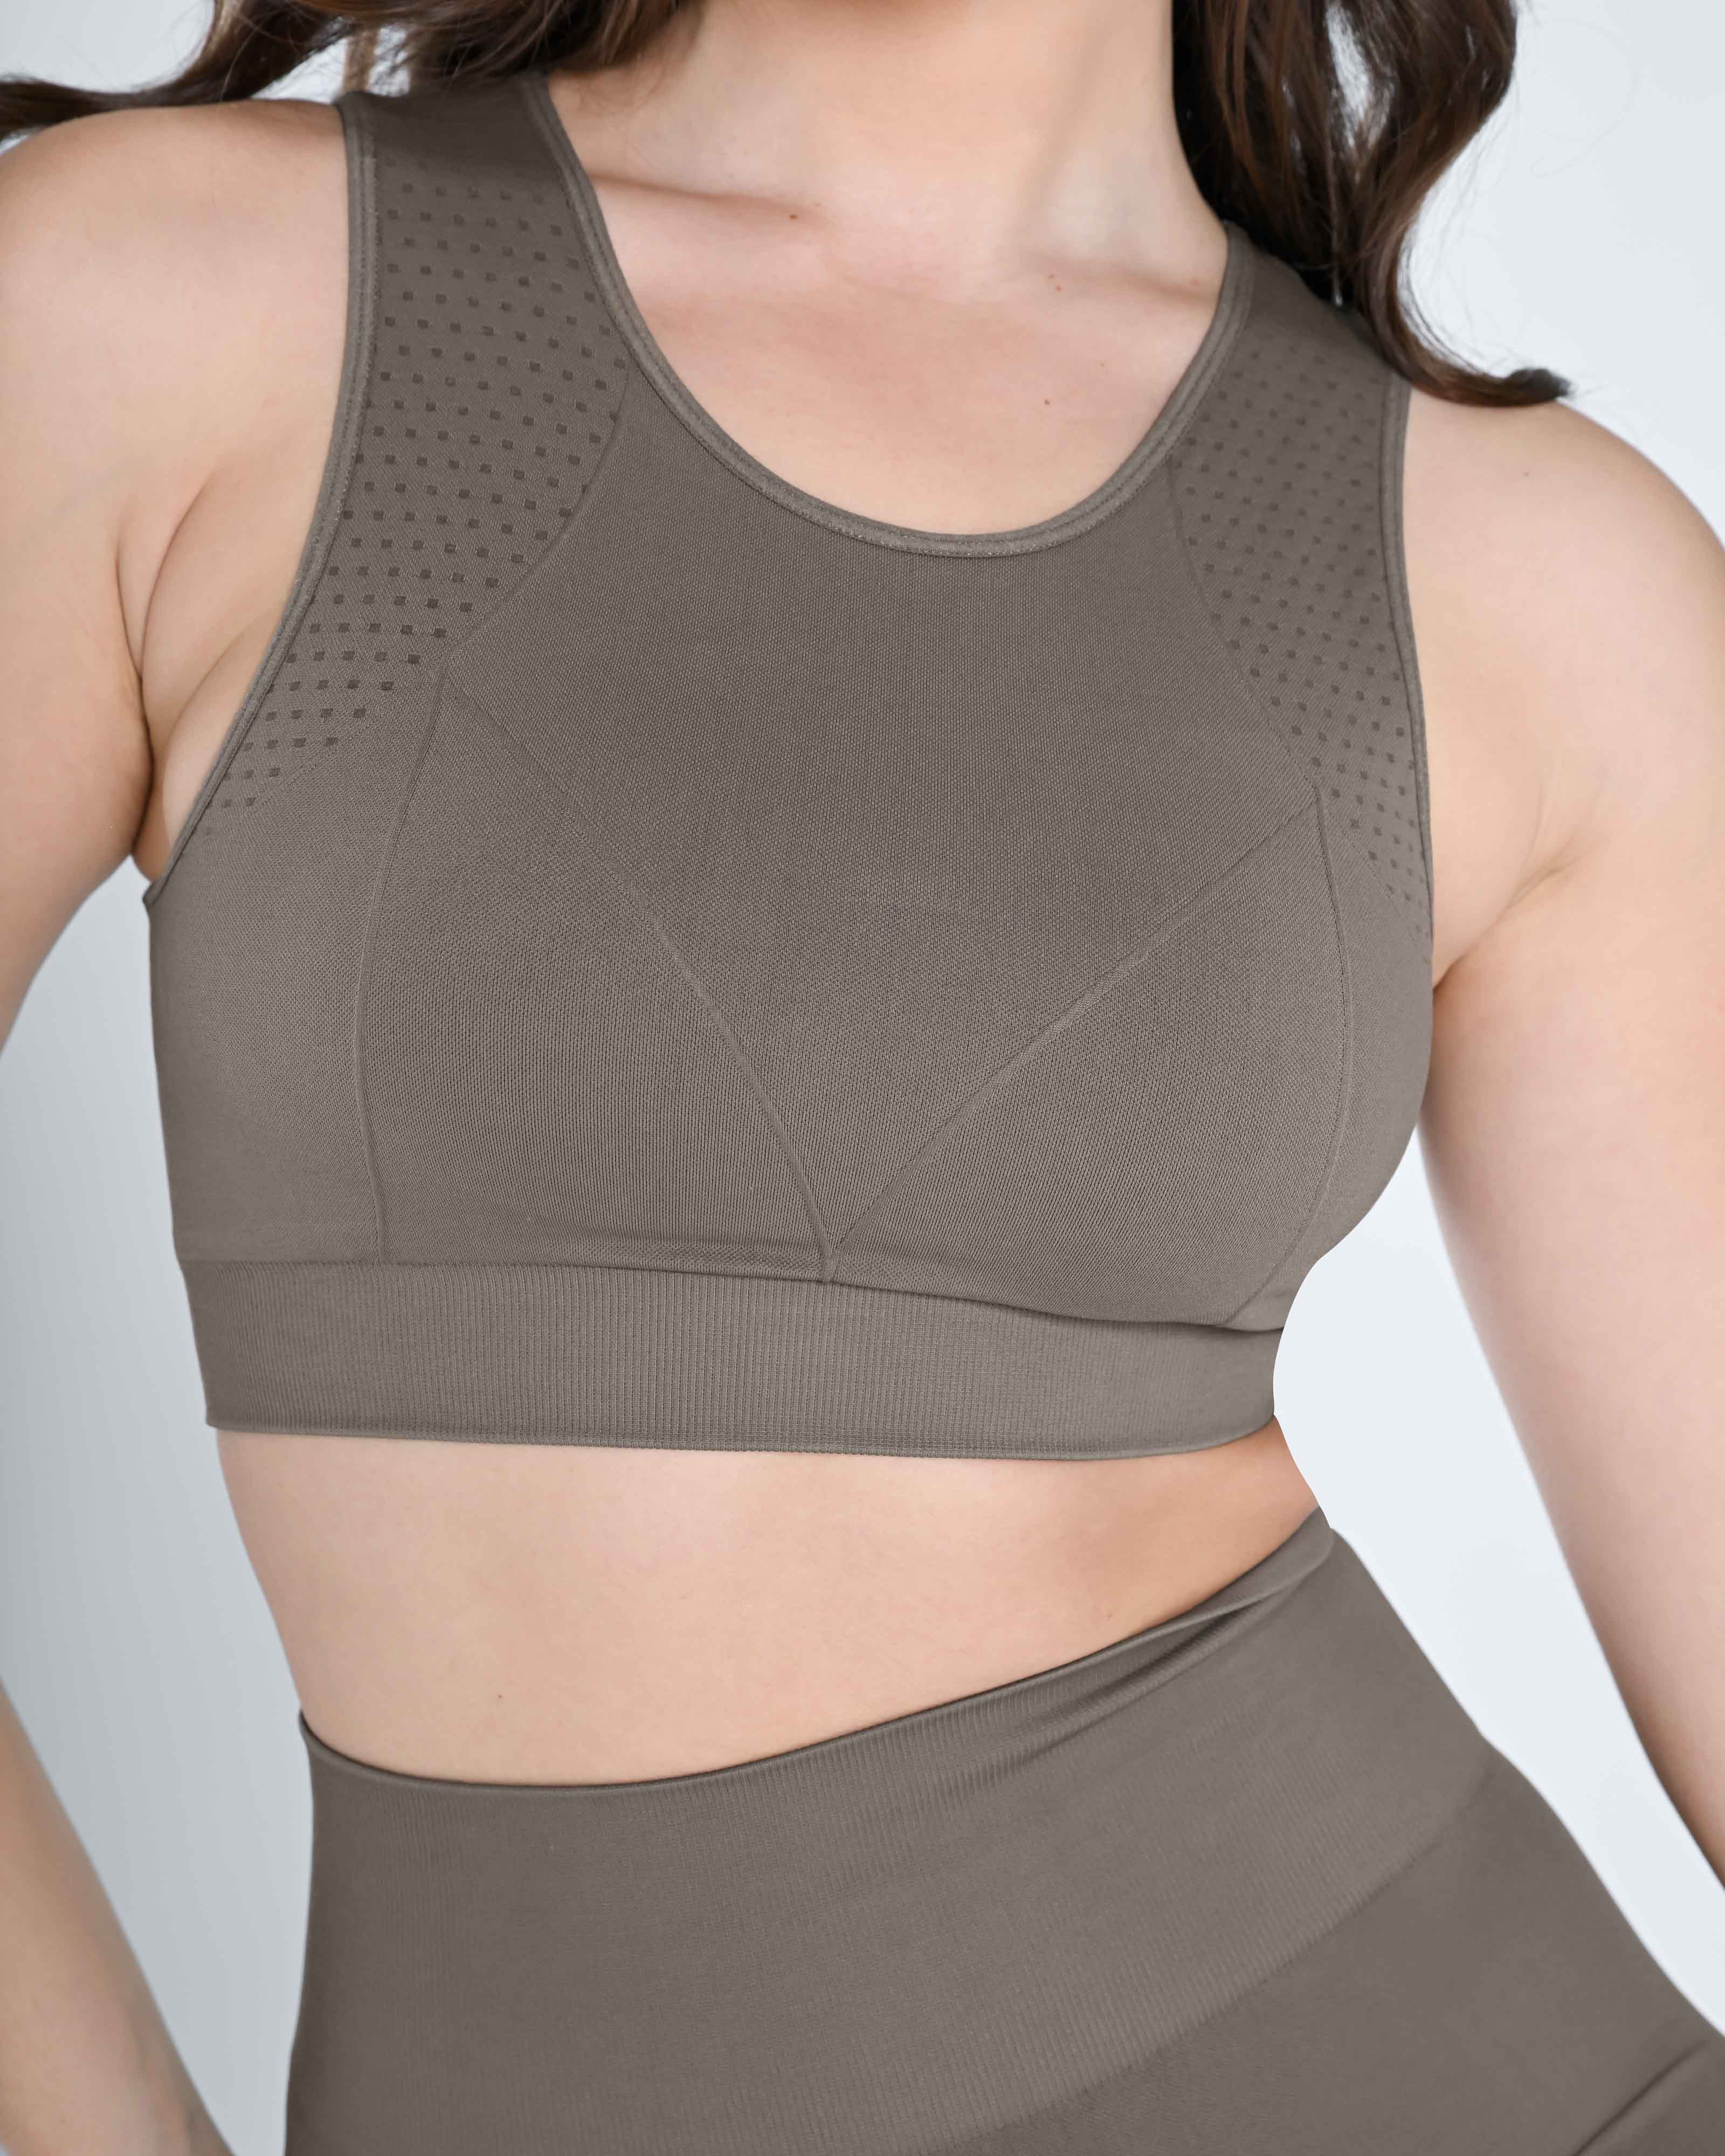 ACTIVEWEAR gone TOO FAR??!? *Cosmolle Clothing Review* 